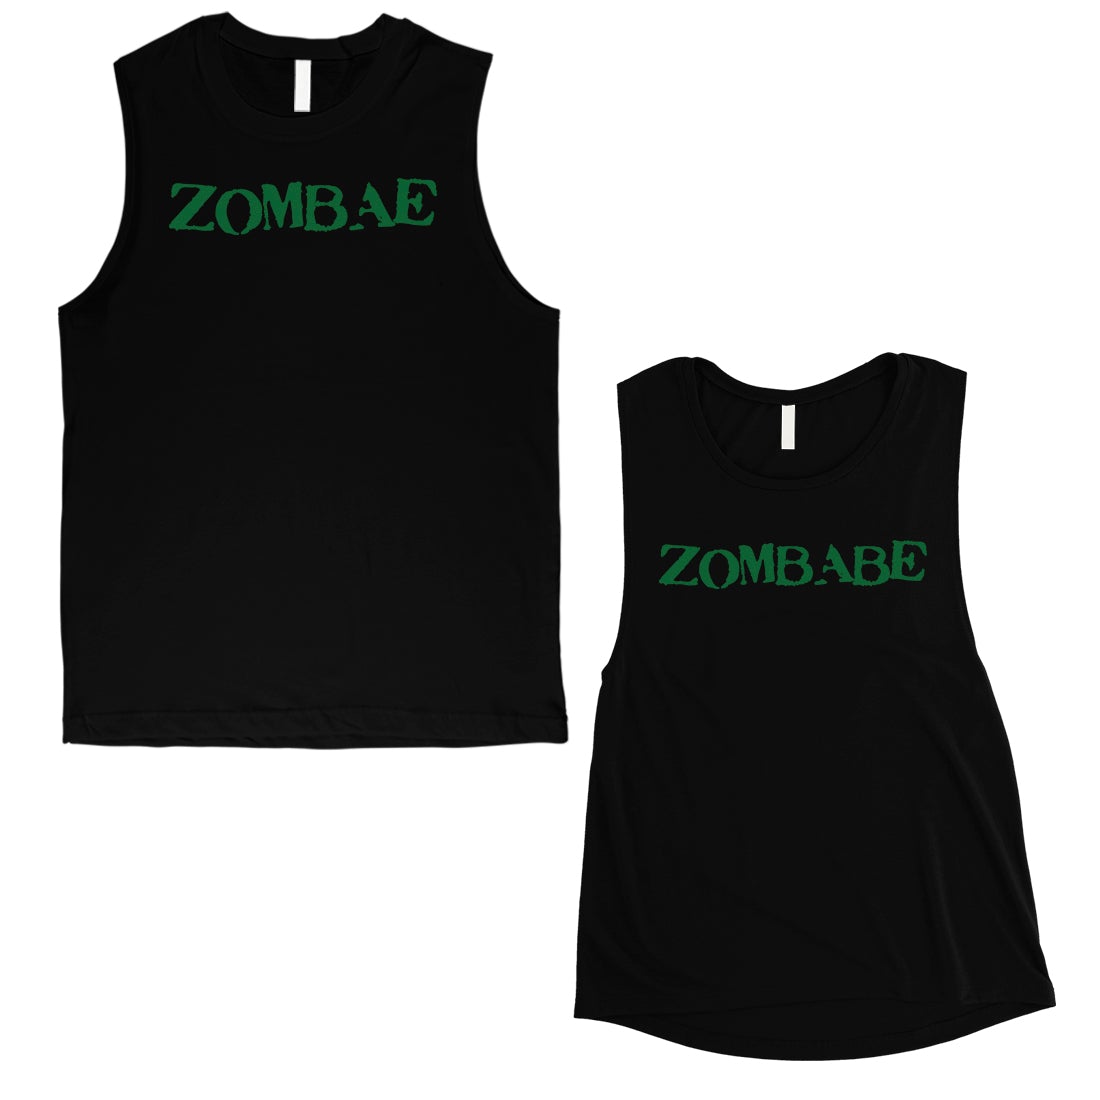 Zombae And Zombabe Couples Muscle Tank Tops Black